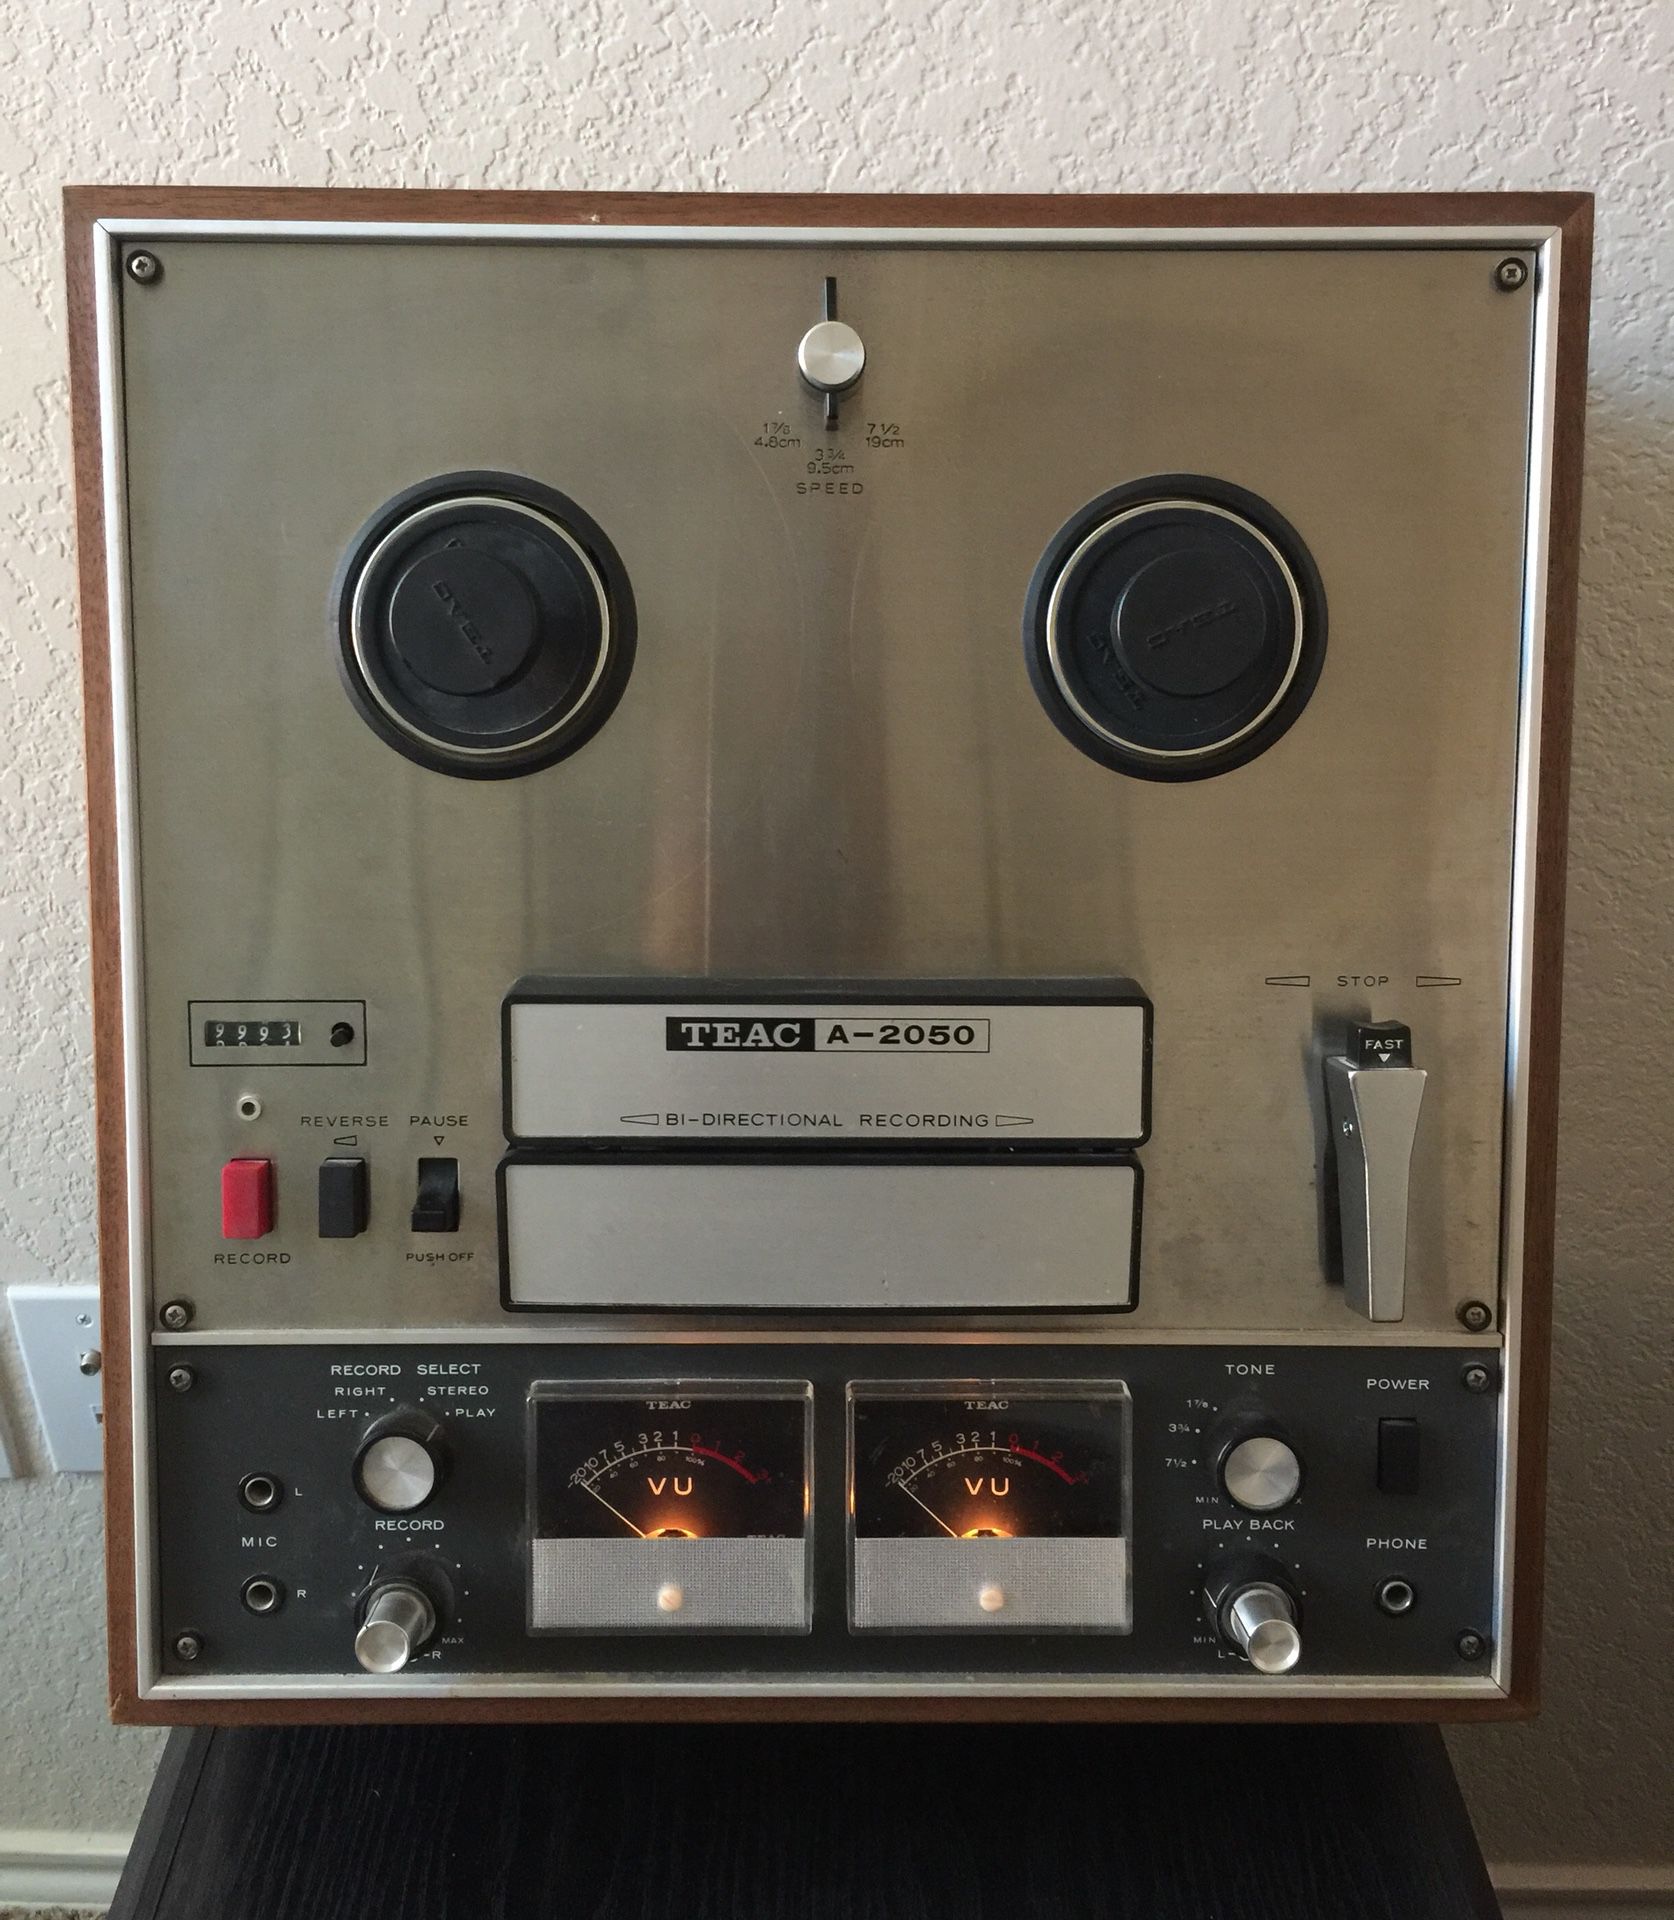 Teac A-2050 Reel to Reel tape recorder/player for Sale in San Antonio, TX -  OfferUp